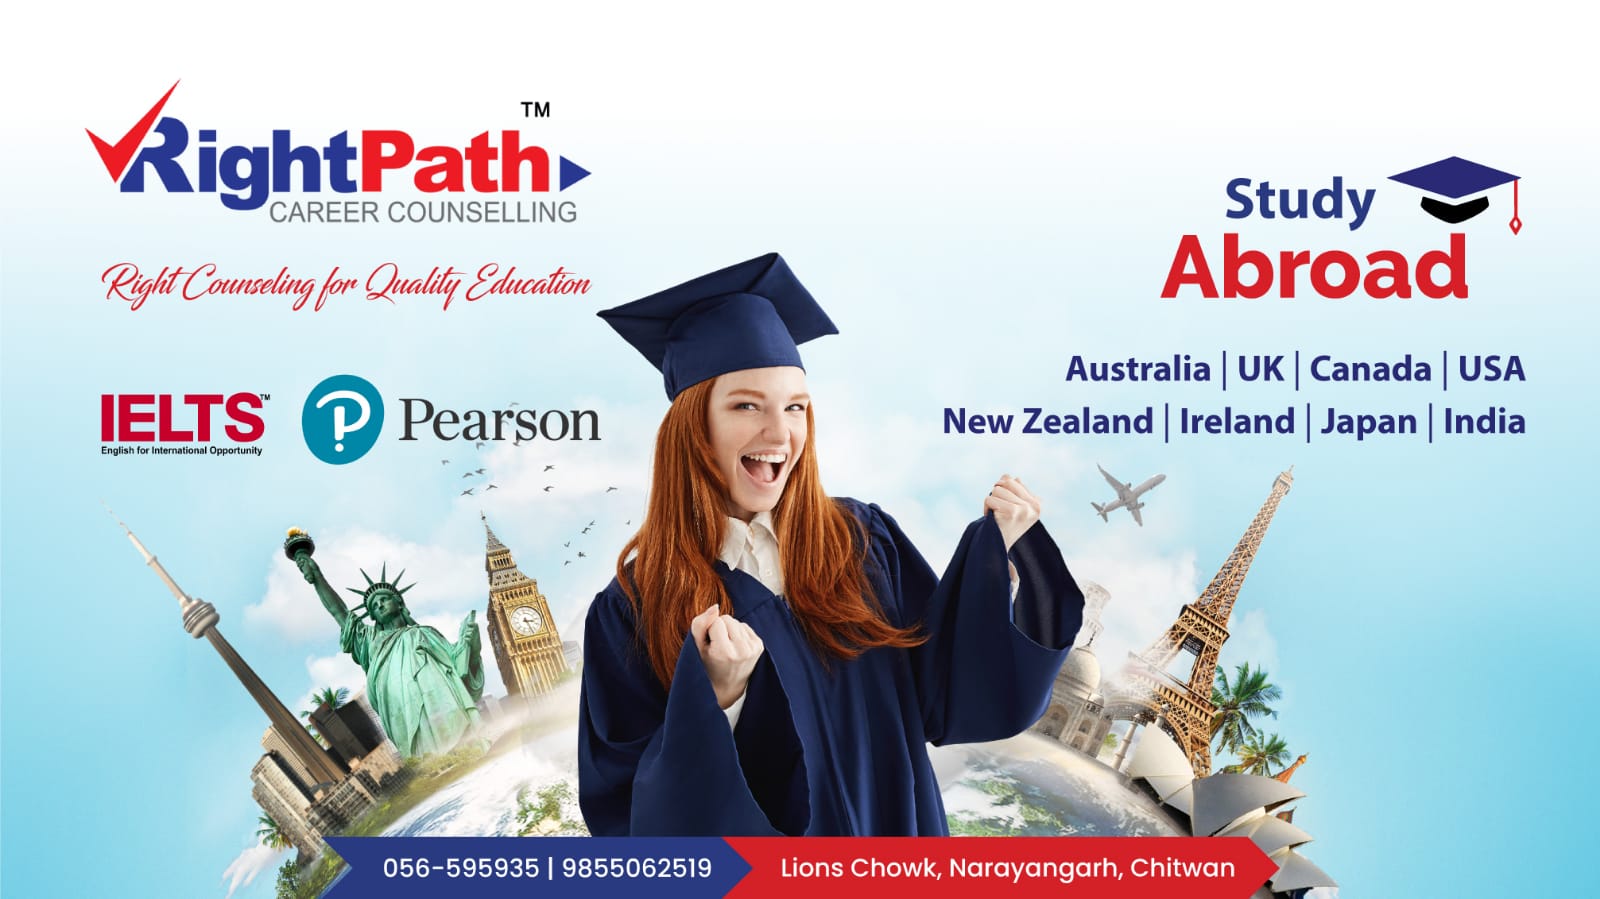 RightPath’s ‘Grand Education Conclave’ to be held in Chitwan on May 17th